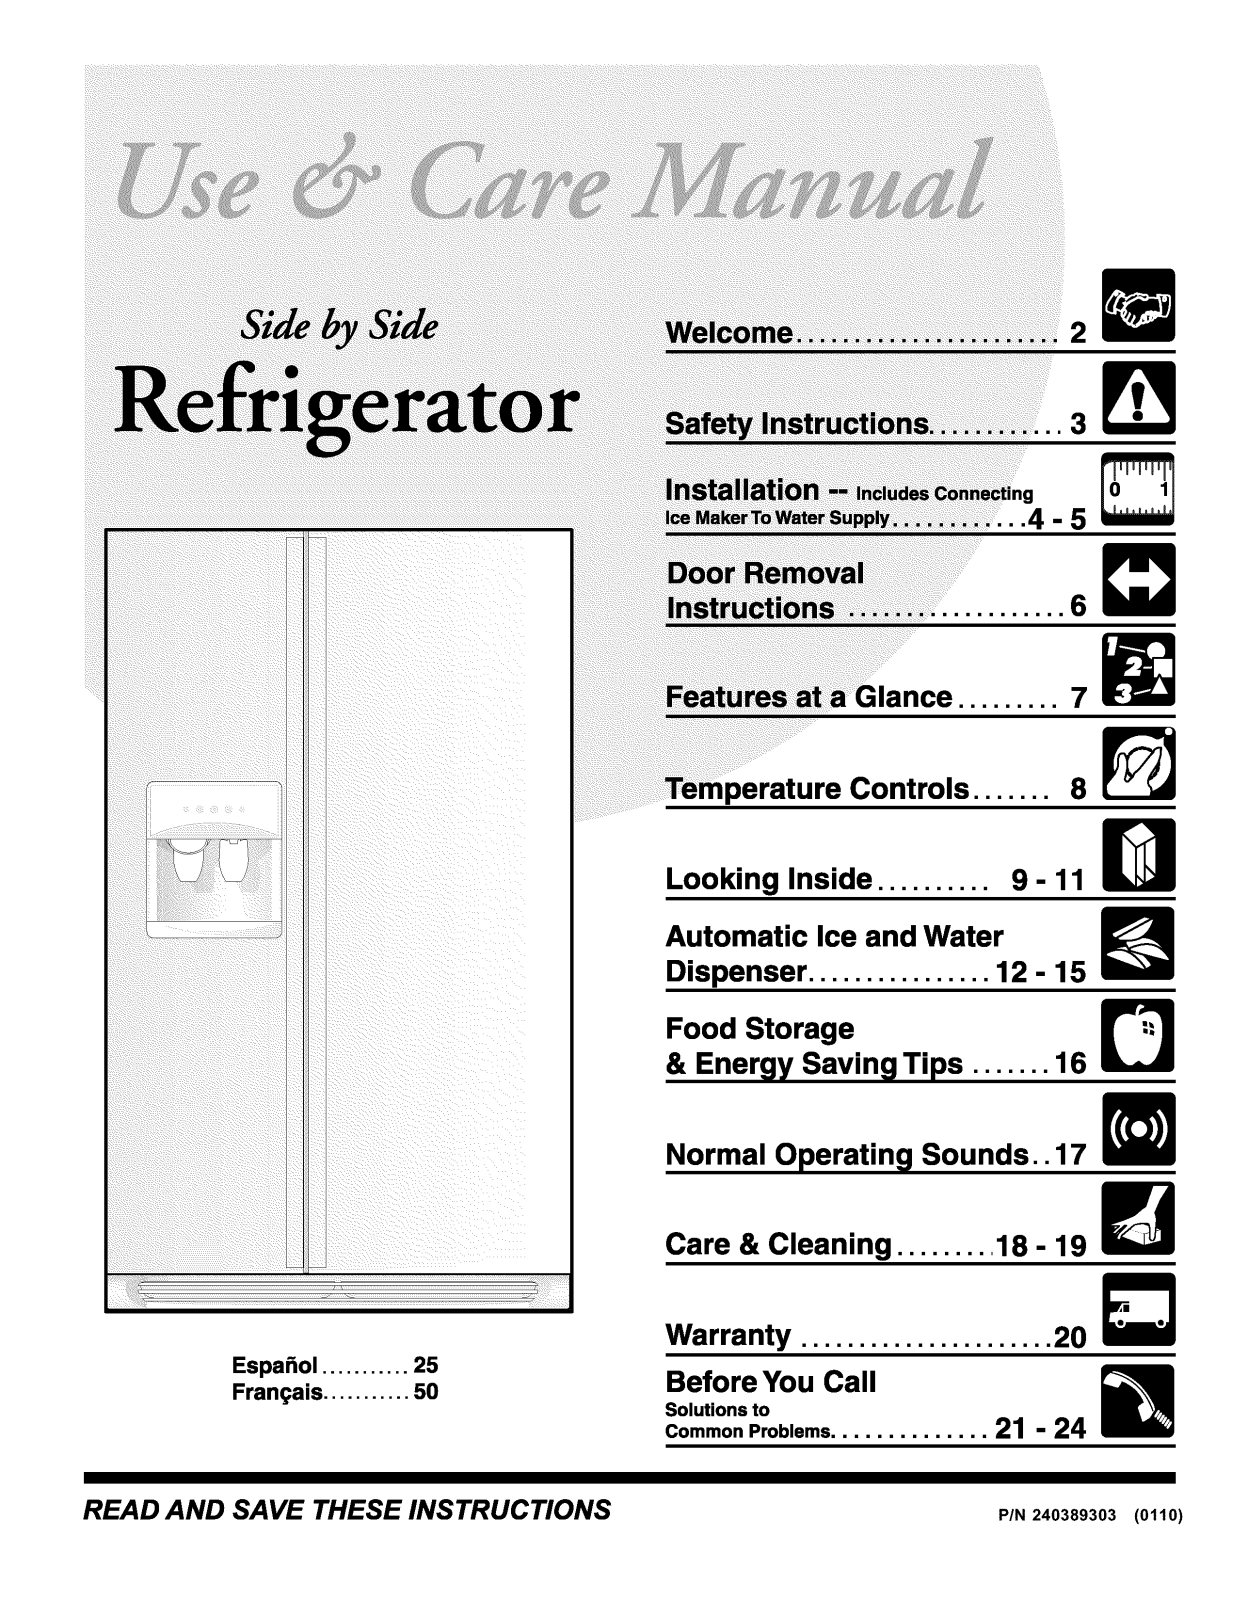 Frigidaire FRS26KW3AW3, FRS26KW3AQ3, FRS26KW3AB3, FRS26HF5AW1, FRS26HF5AQ1 Owner’s Manual